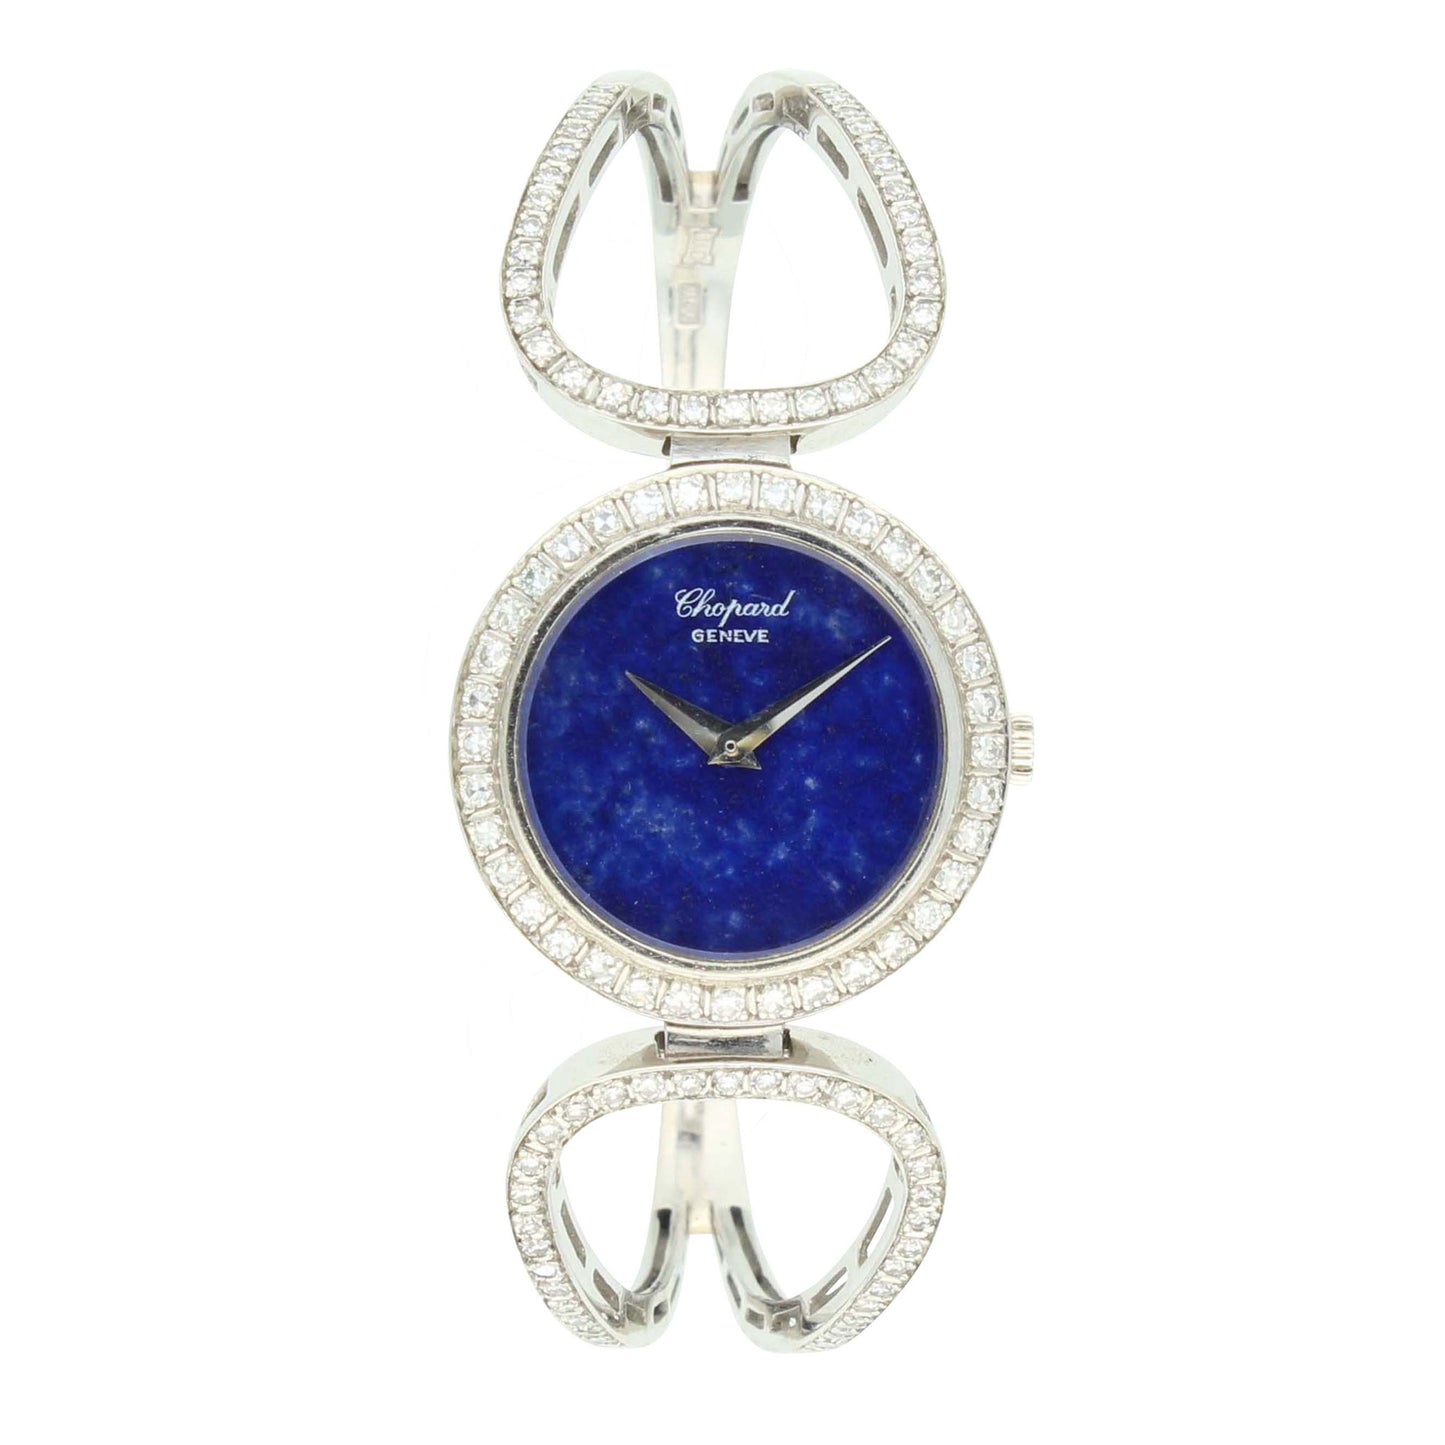 18ct white gold bracelet and diamond set bracelet watch with lapis dial. Made 1970's